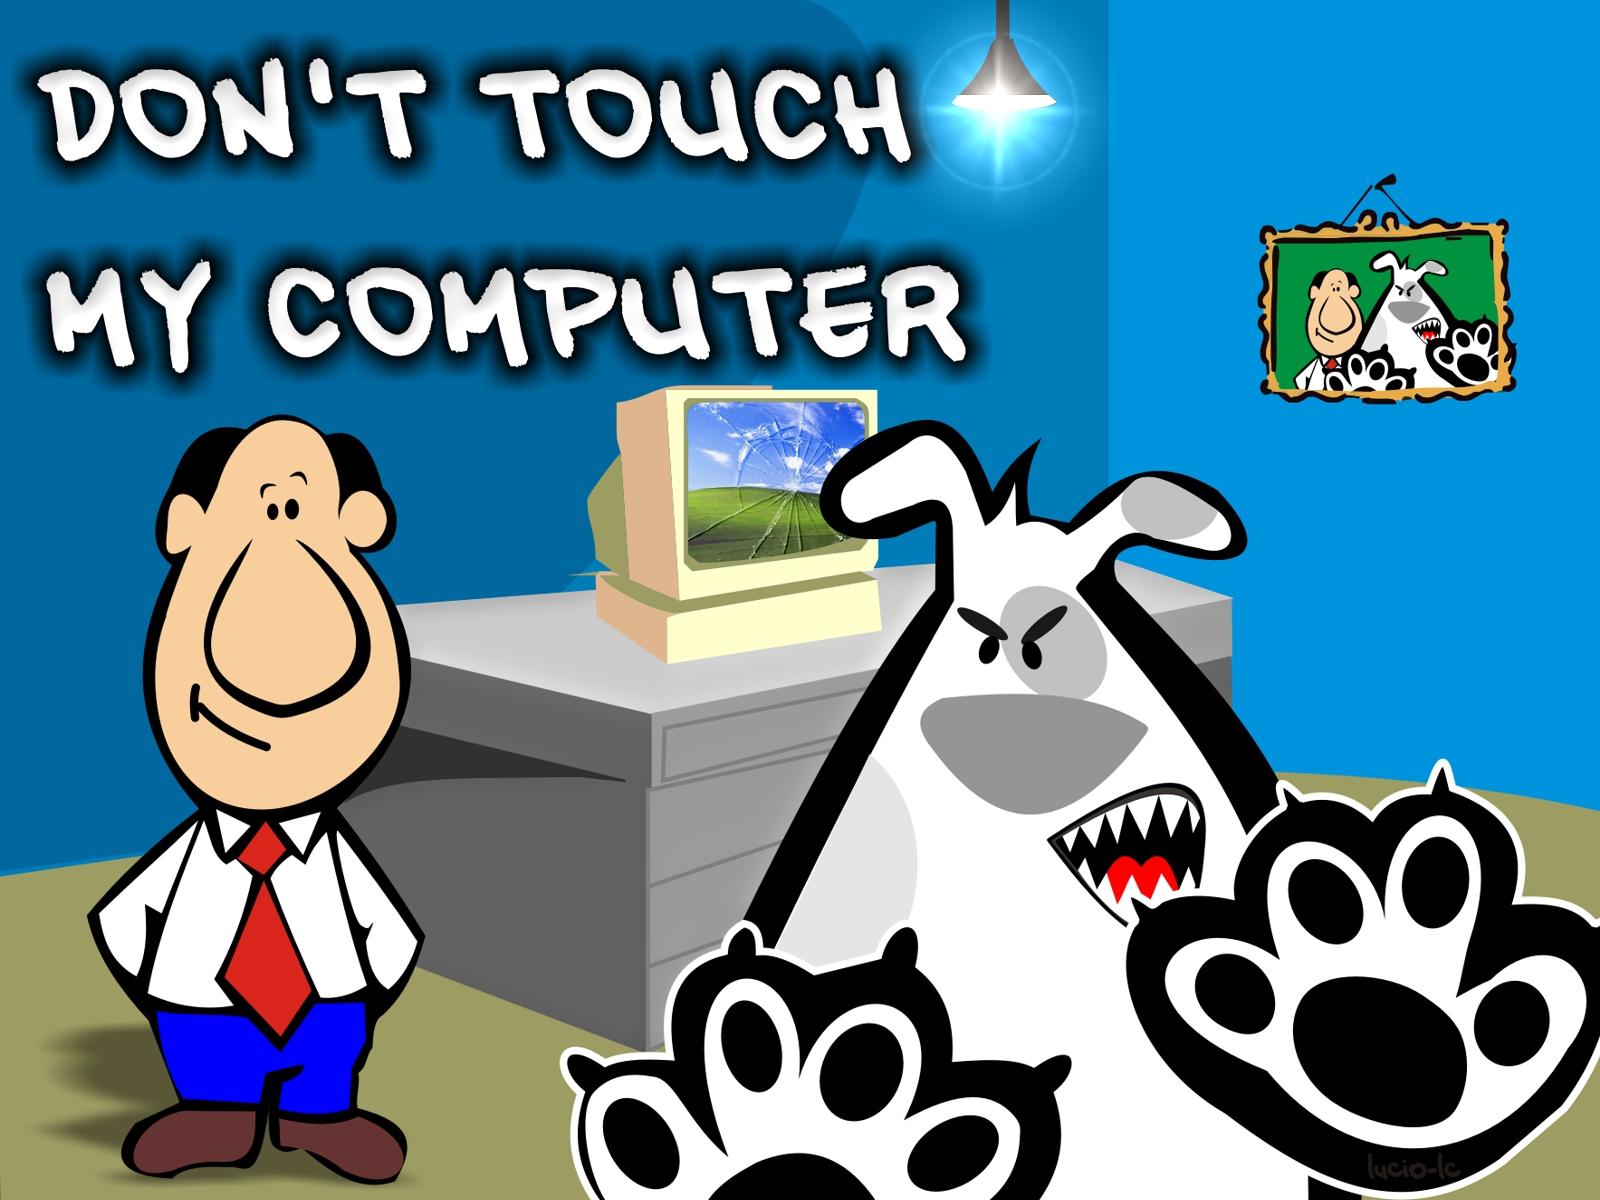 DON T TOUCH MY COMPUTER WALLPAPER   36395   HD Wallpapers